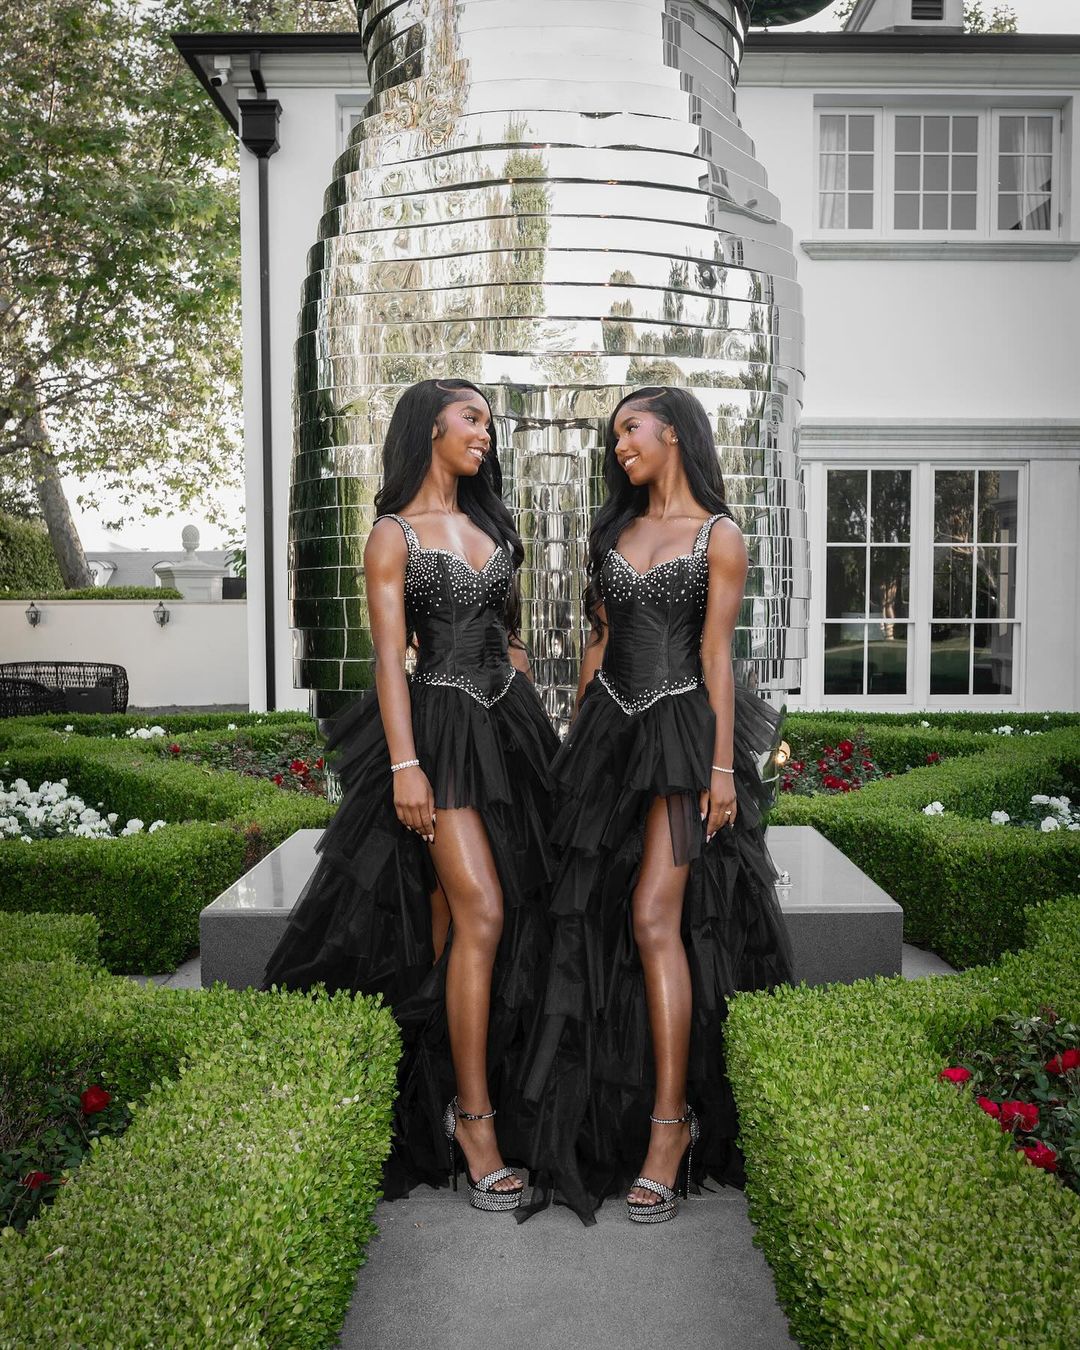 The Combs Twins Looked Stunning At Prom